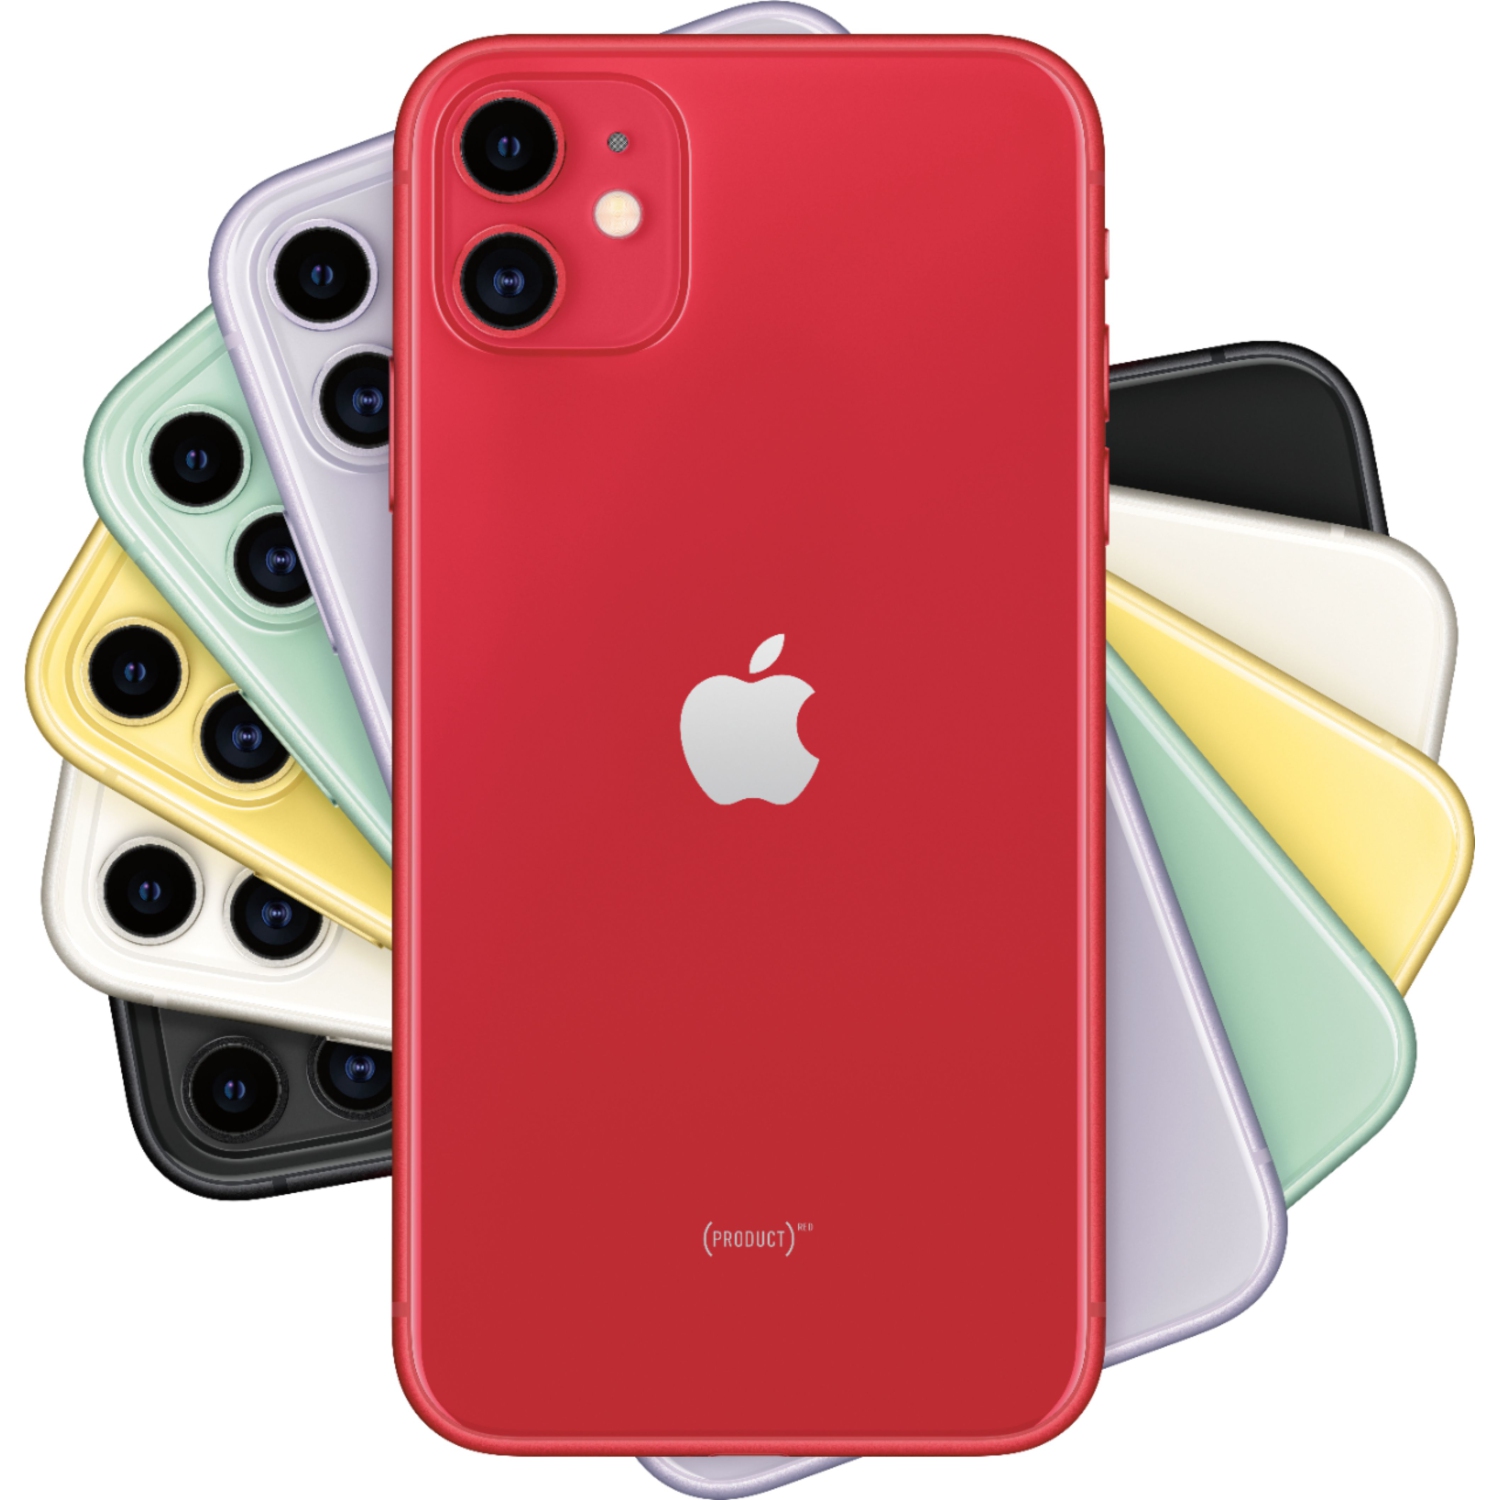 Apple iPhone 11 64GB Smartphone - (PRODUCT)RED - Unlocked - Brand